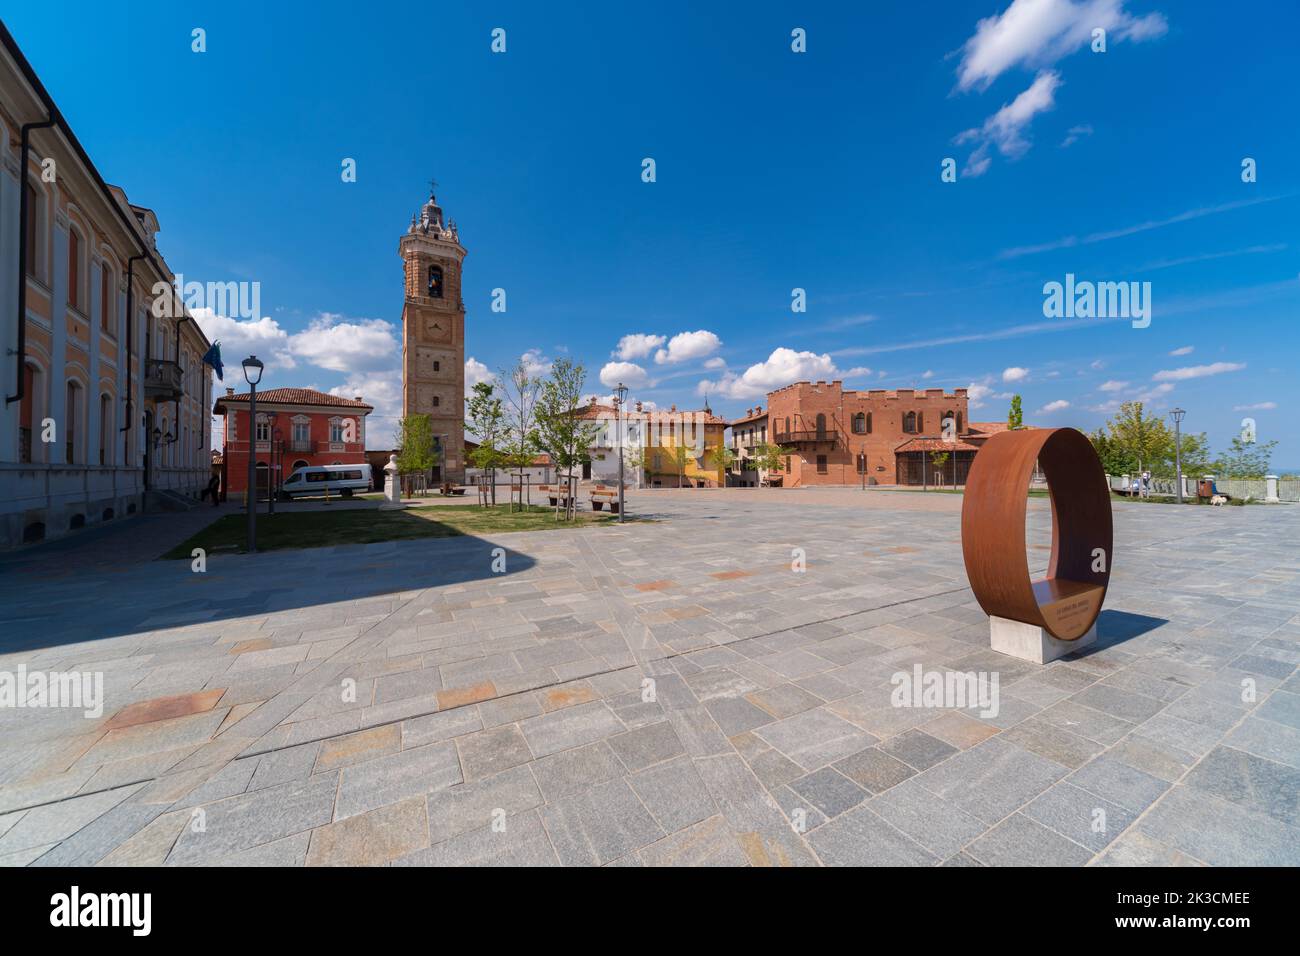 La Morra, Langhe, Piedmont, Italy: Castle square with the bell tower or civic tower (18th century) with clock and palazzi medioevali , blue sky with c Stock Photo